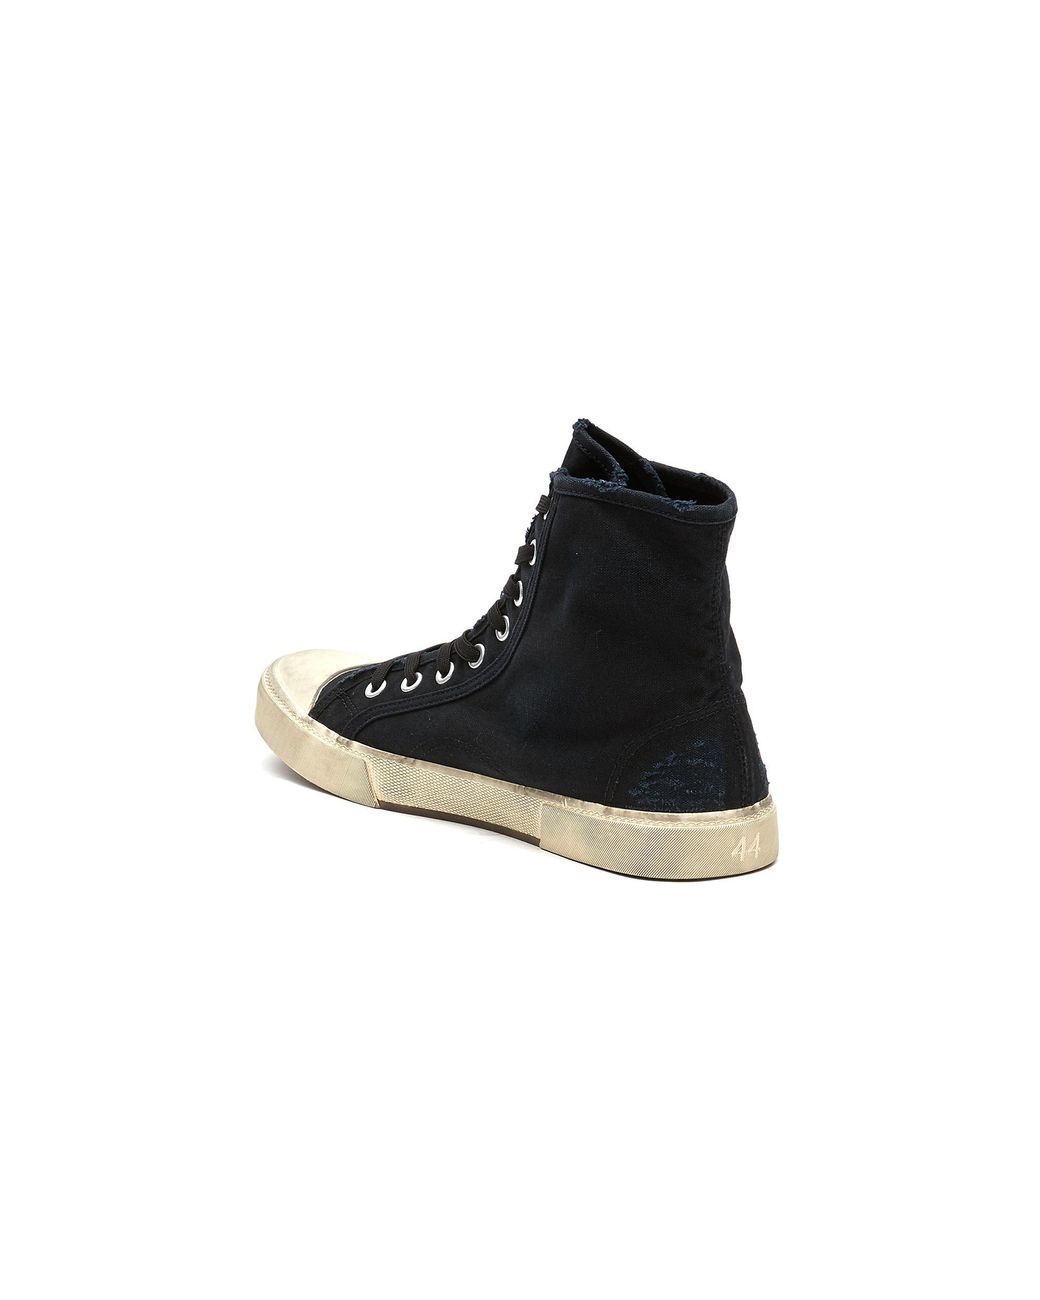 Balenciaga 'paris' High Top Lace Up Sneakers in Black for Men | Lyst